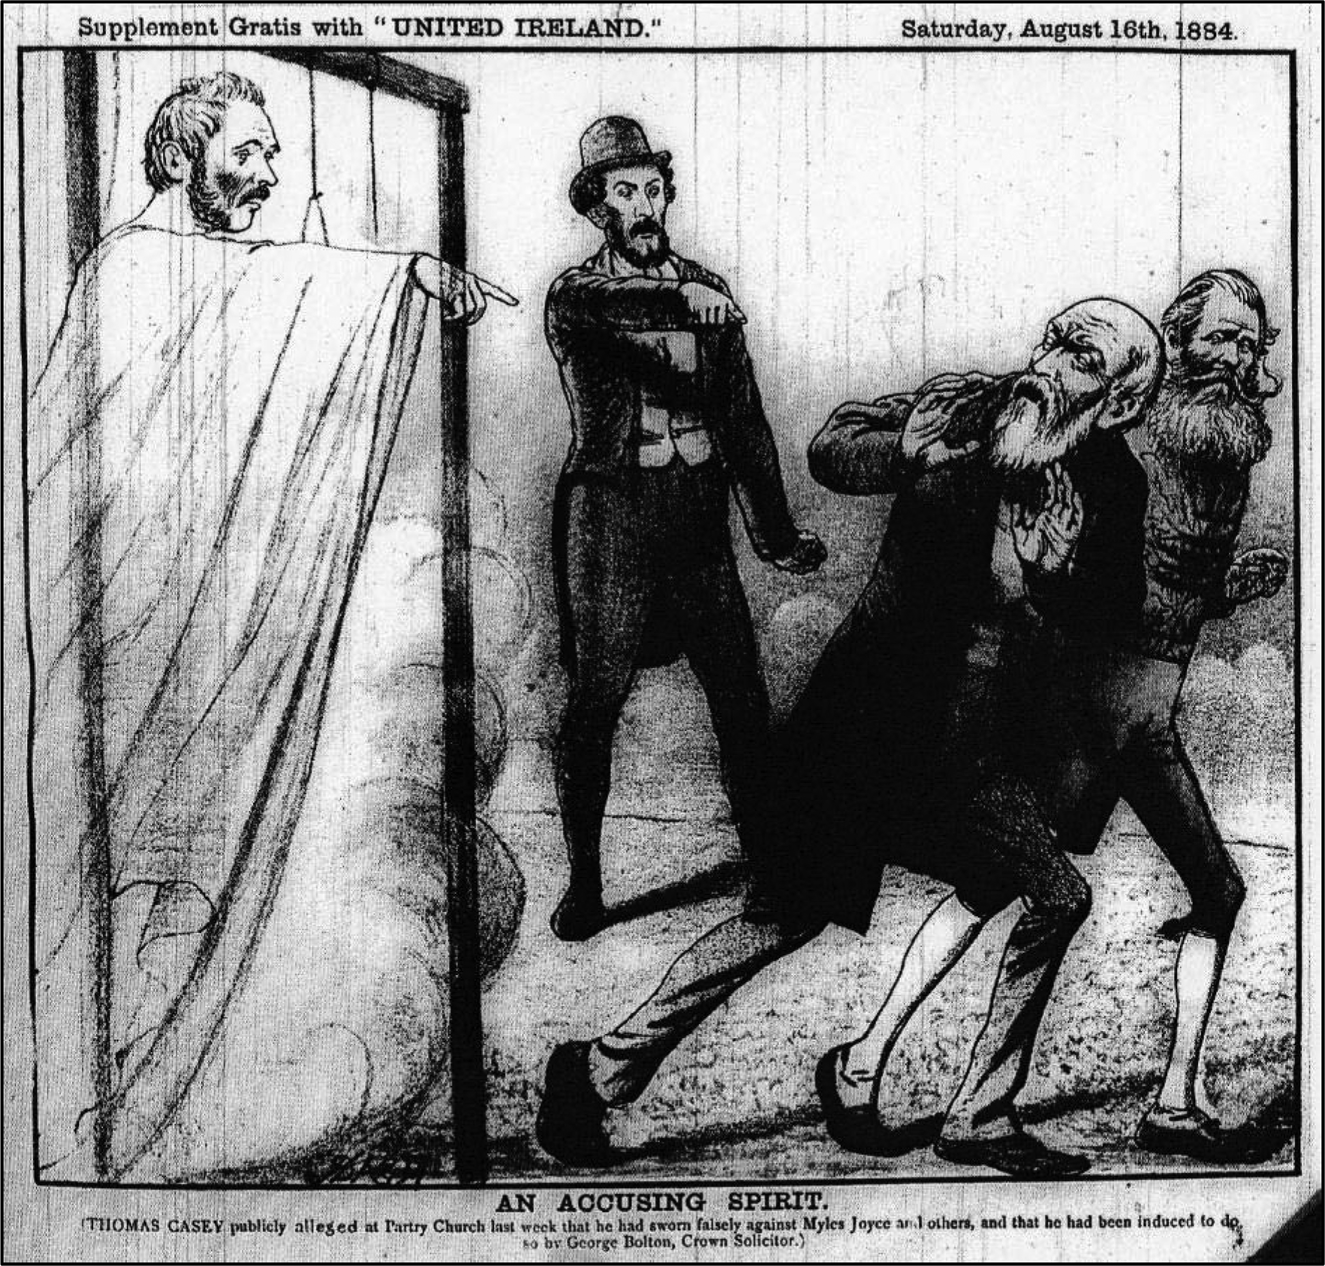 When the Hangman Came to Galway: A Gruesome True Story of Murder